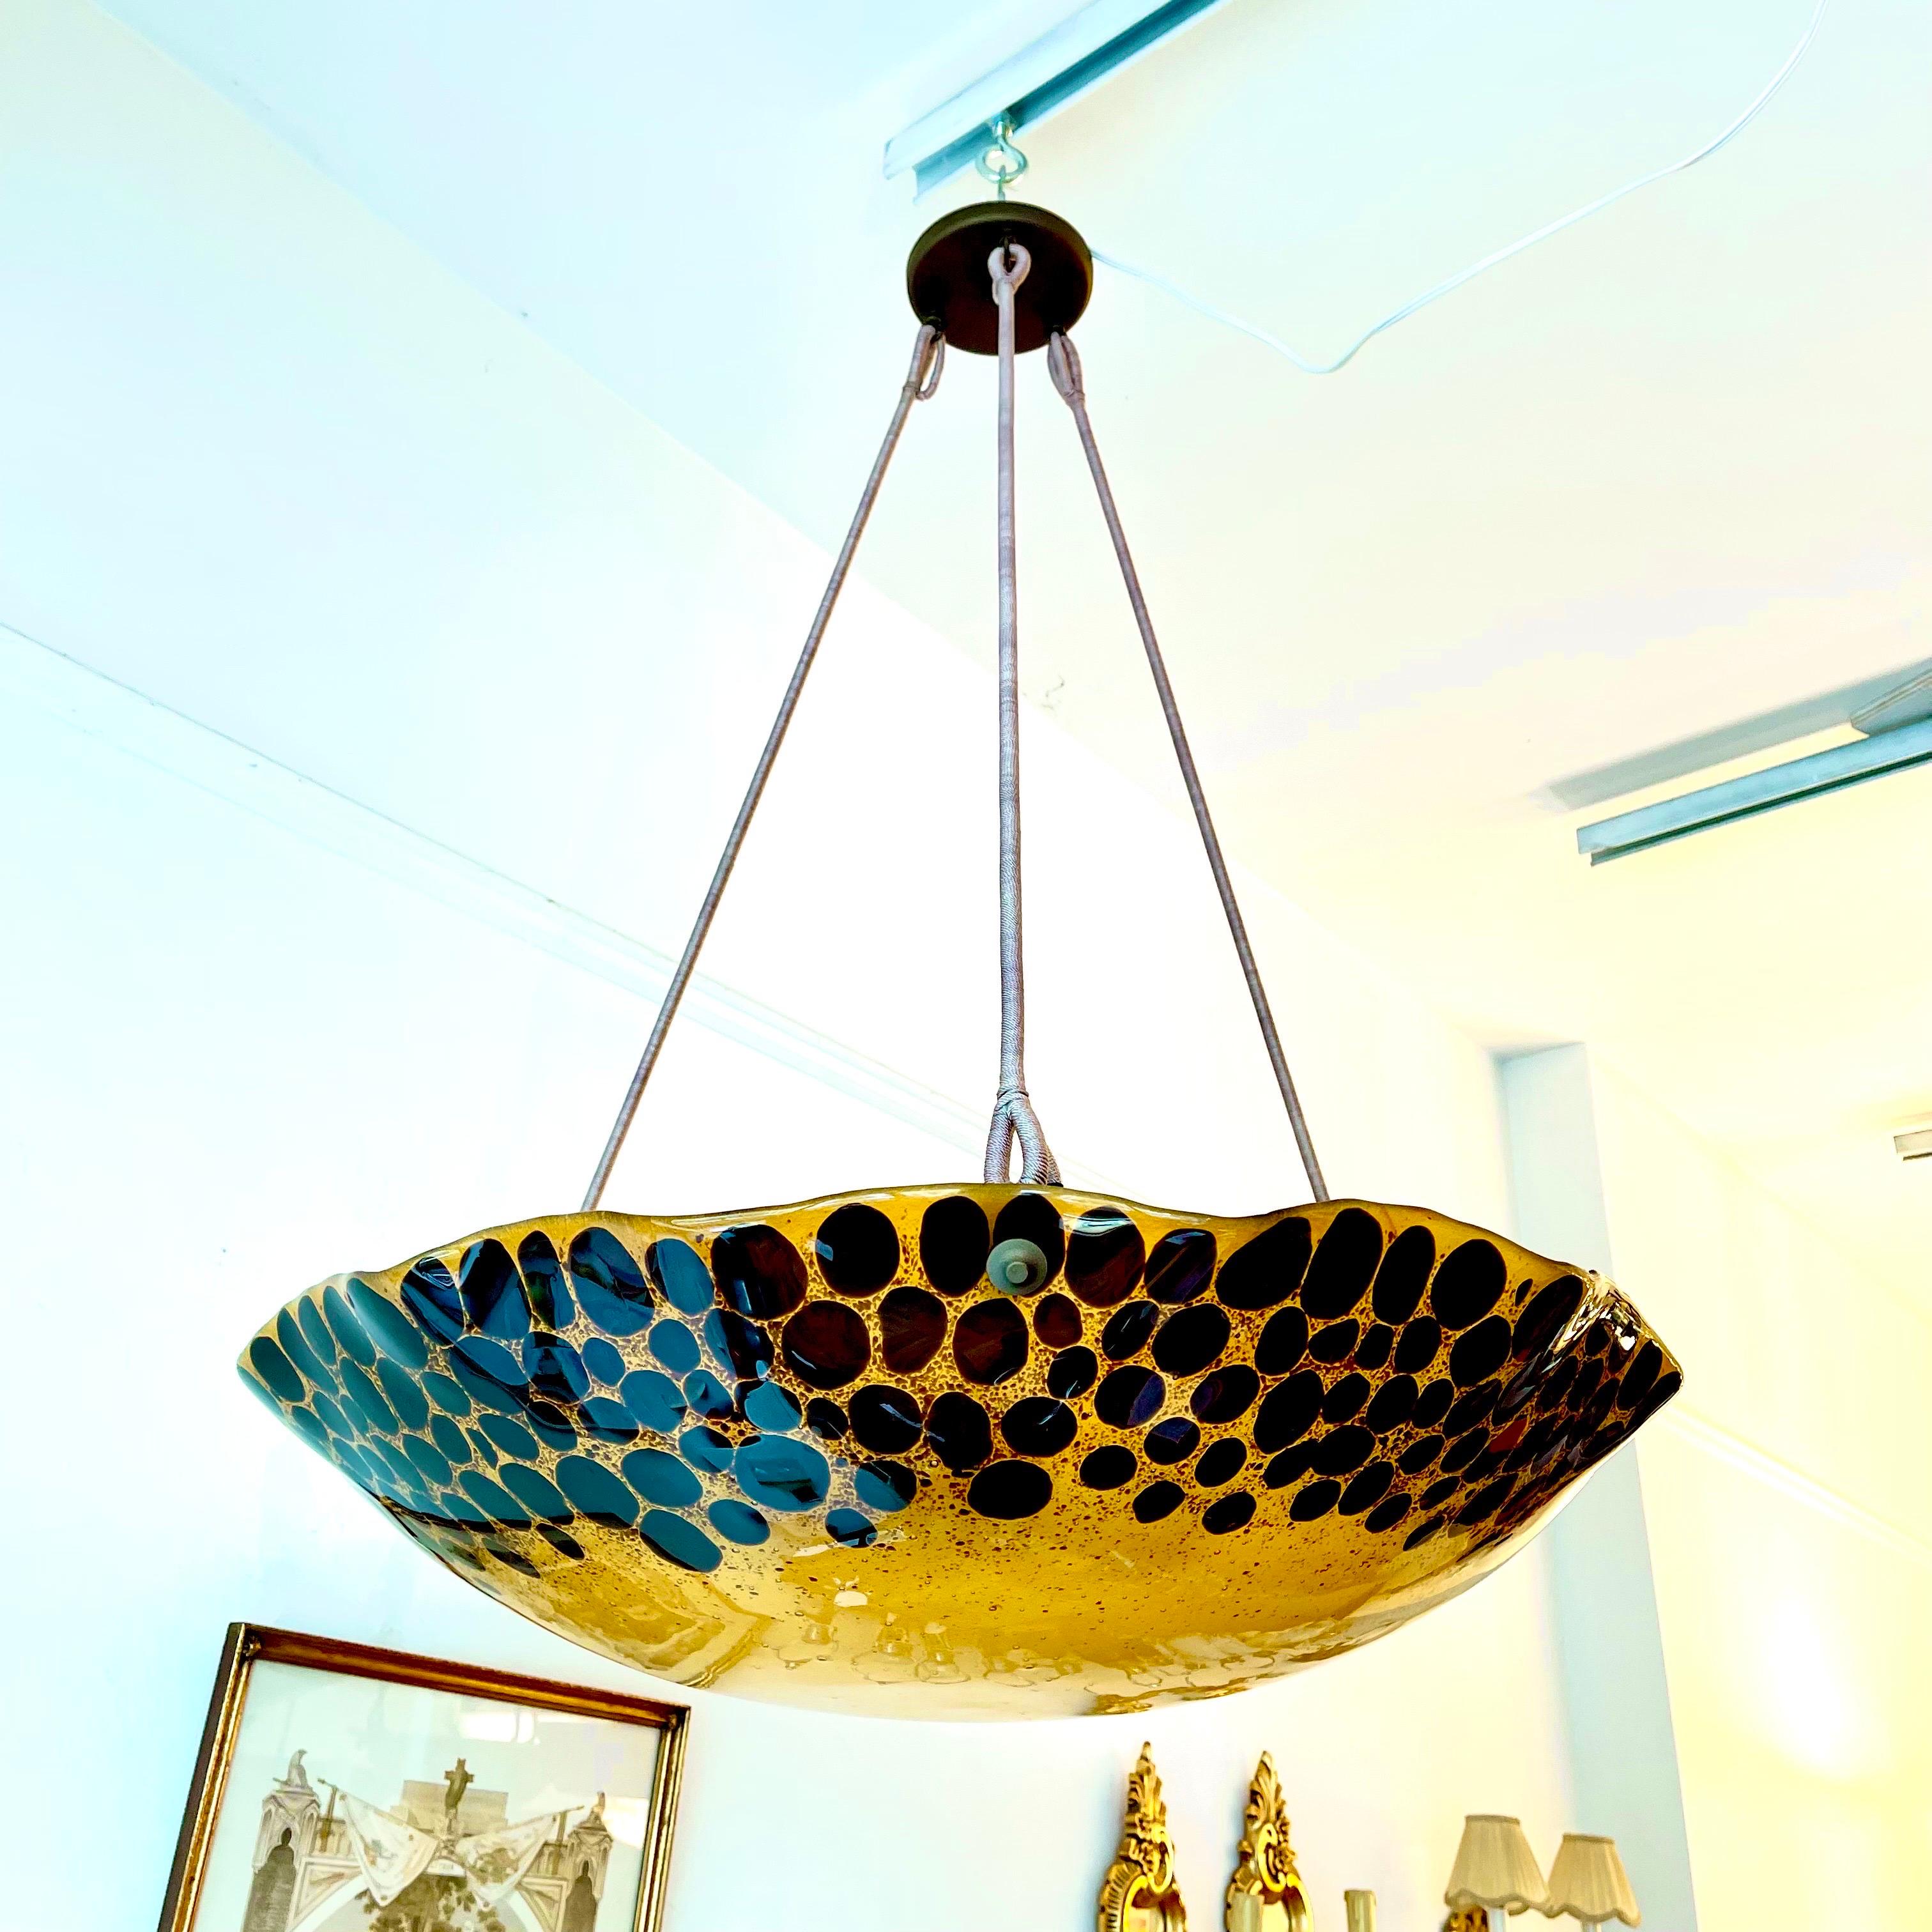 Formidably sized fixture will serve as a centerpiece and main light source for large rooms. A cloud of amber glass floats with brown leopard spots and suspends 6 full size lightbulbs (100W max per bulb). Drop may be altered at no additional charge.